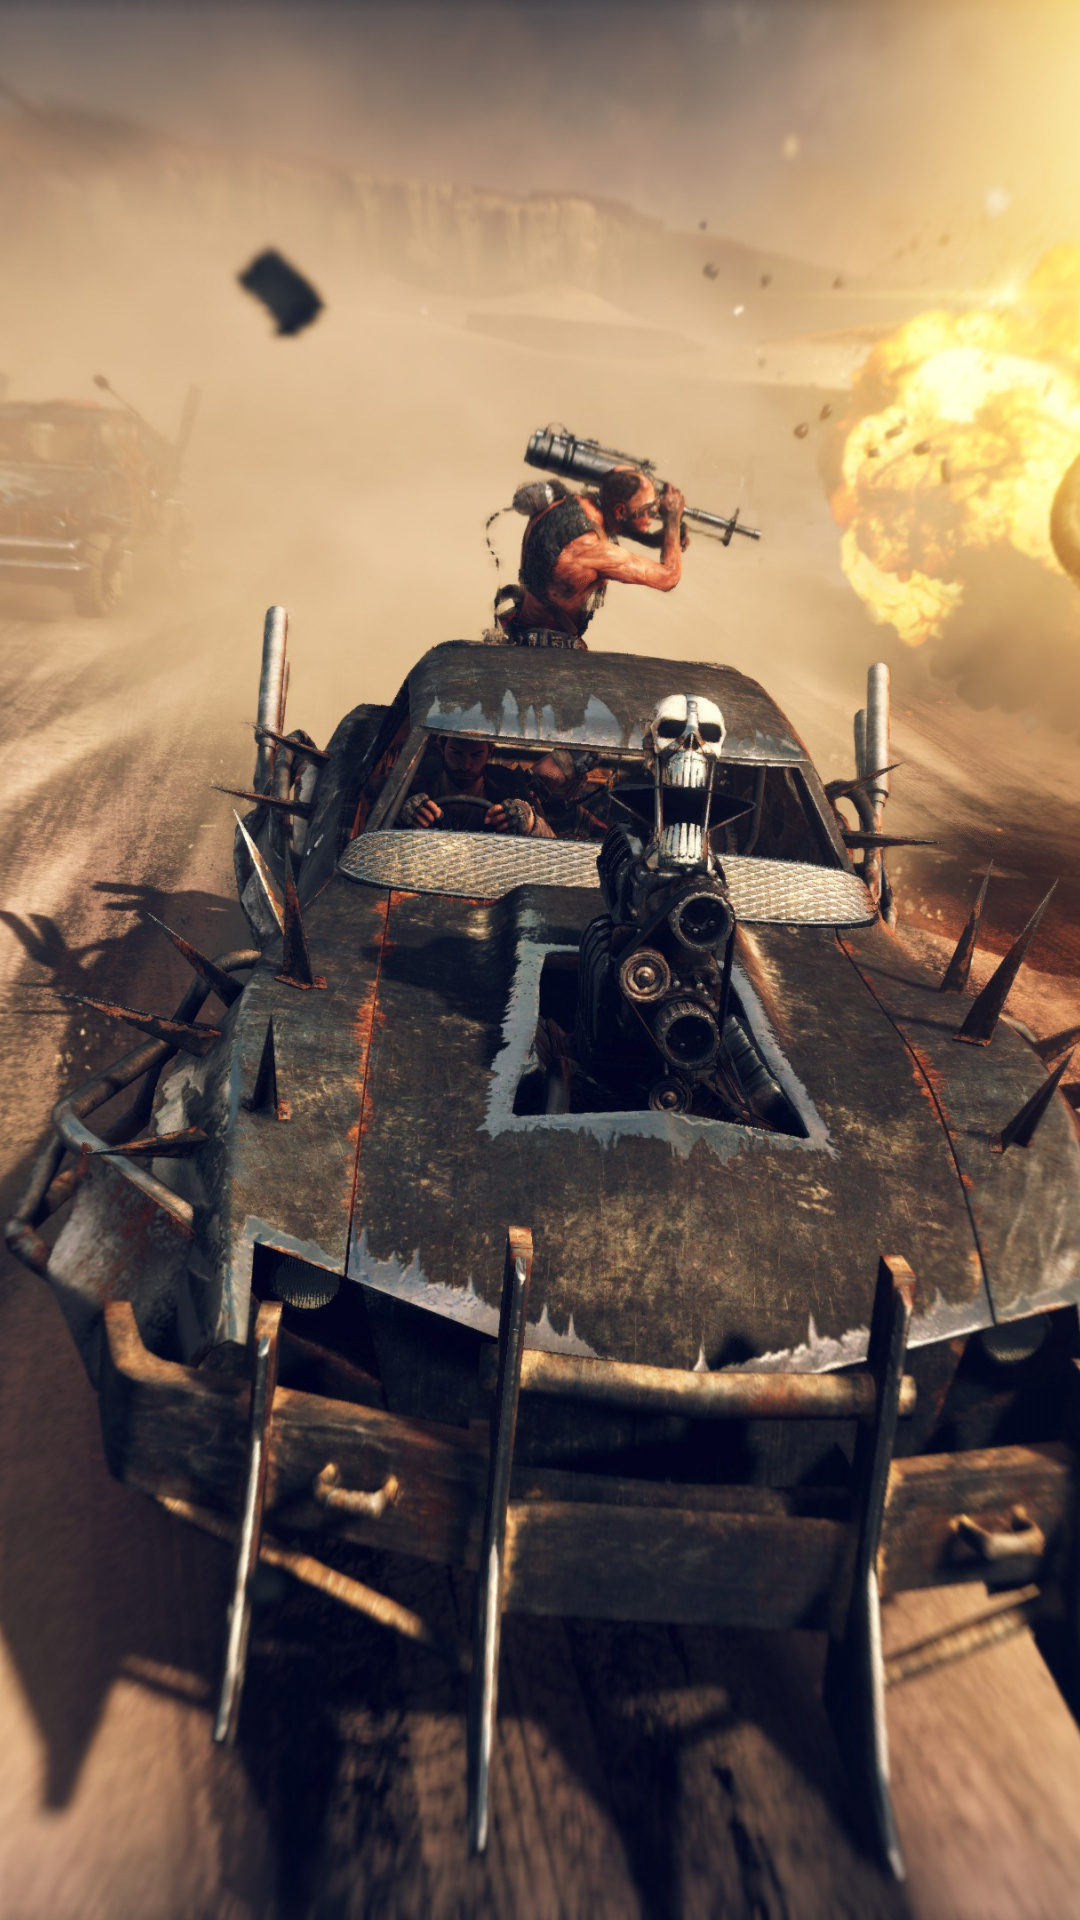 Mad Max: A 2015 game developed by Avalanche Studios, The lone warrior. 1080x1920 Full HD Wallpaper.